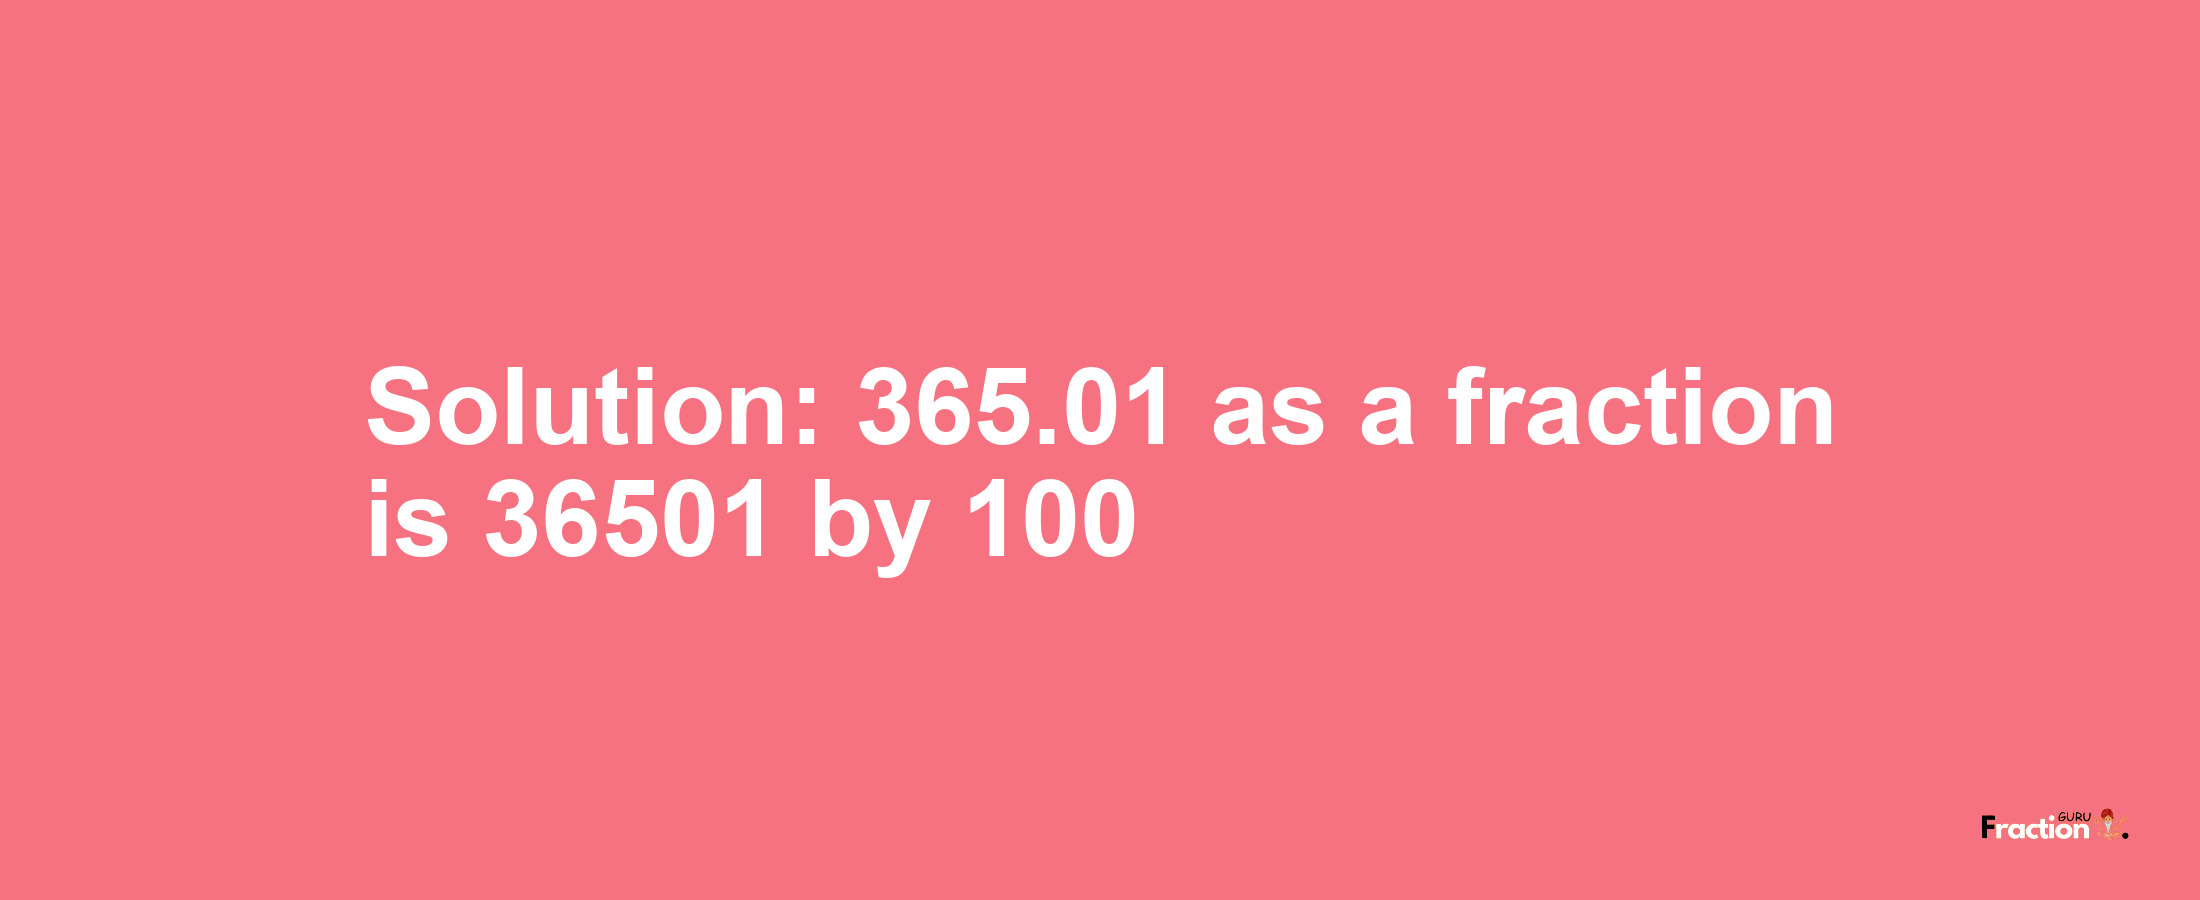 Solution:365.01 as a fraction is 36501/100